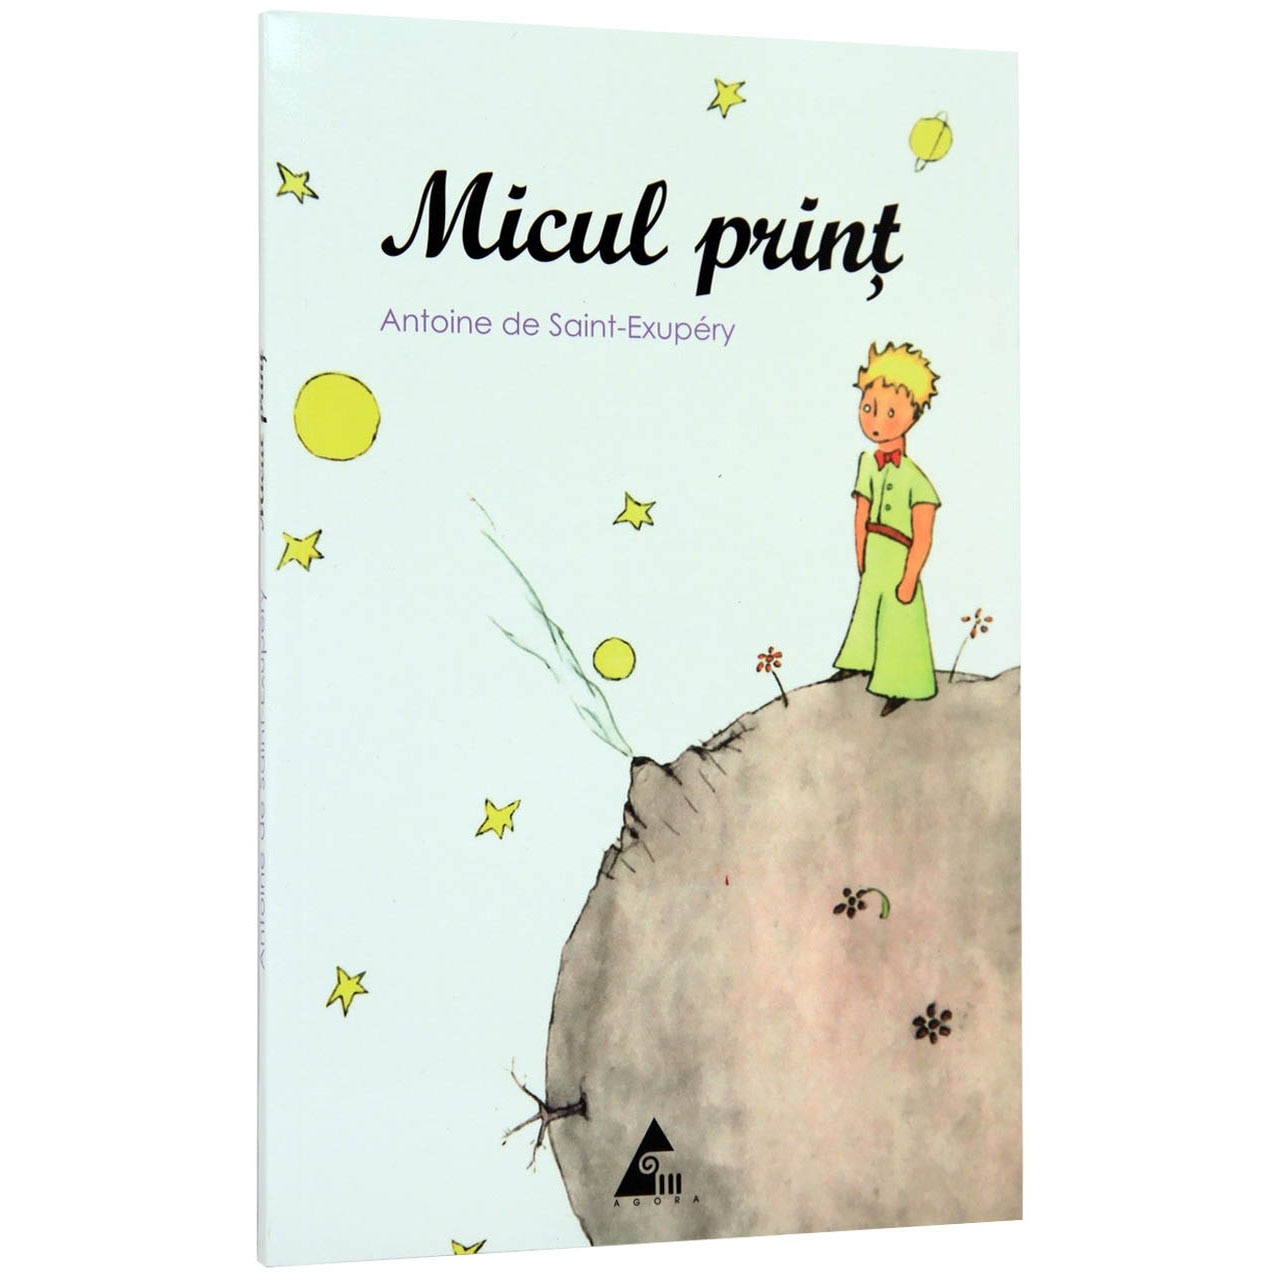 to understand pad forest Micul print - Antoine de Saint - Exupery - eMAG.ro